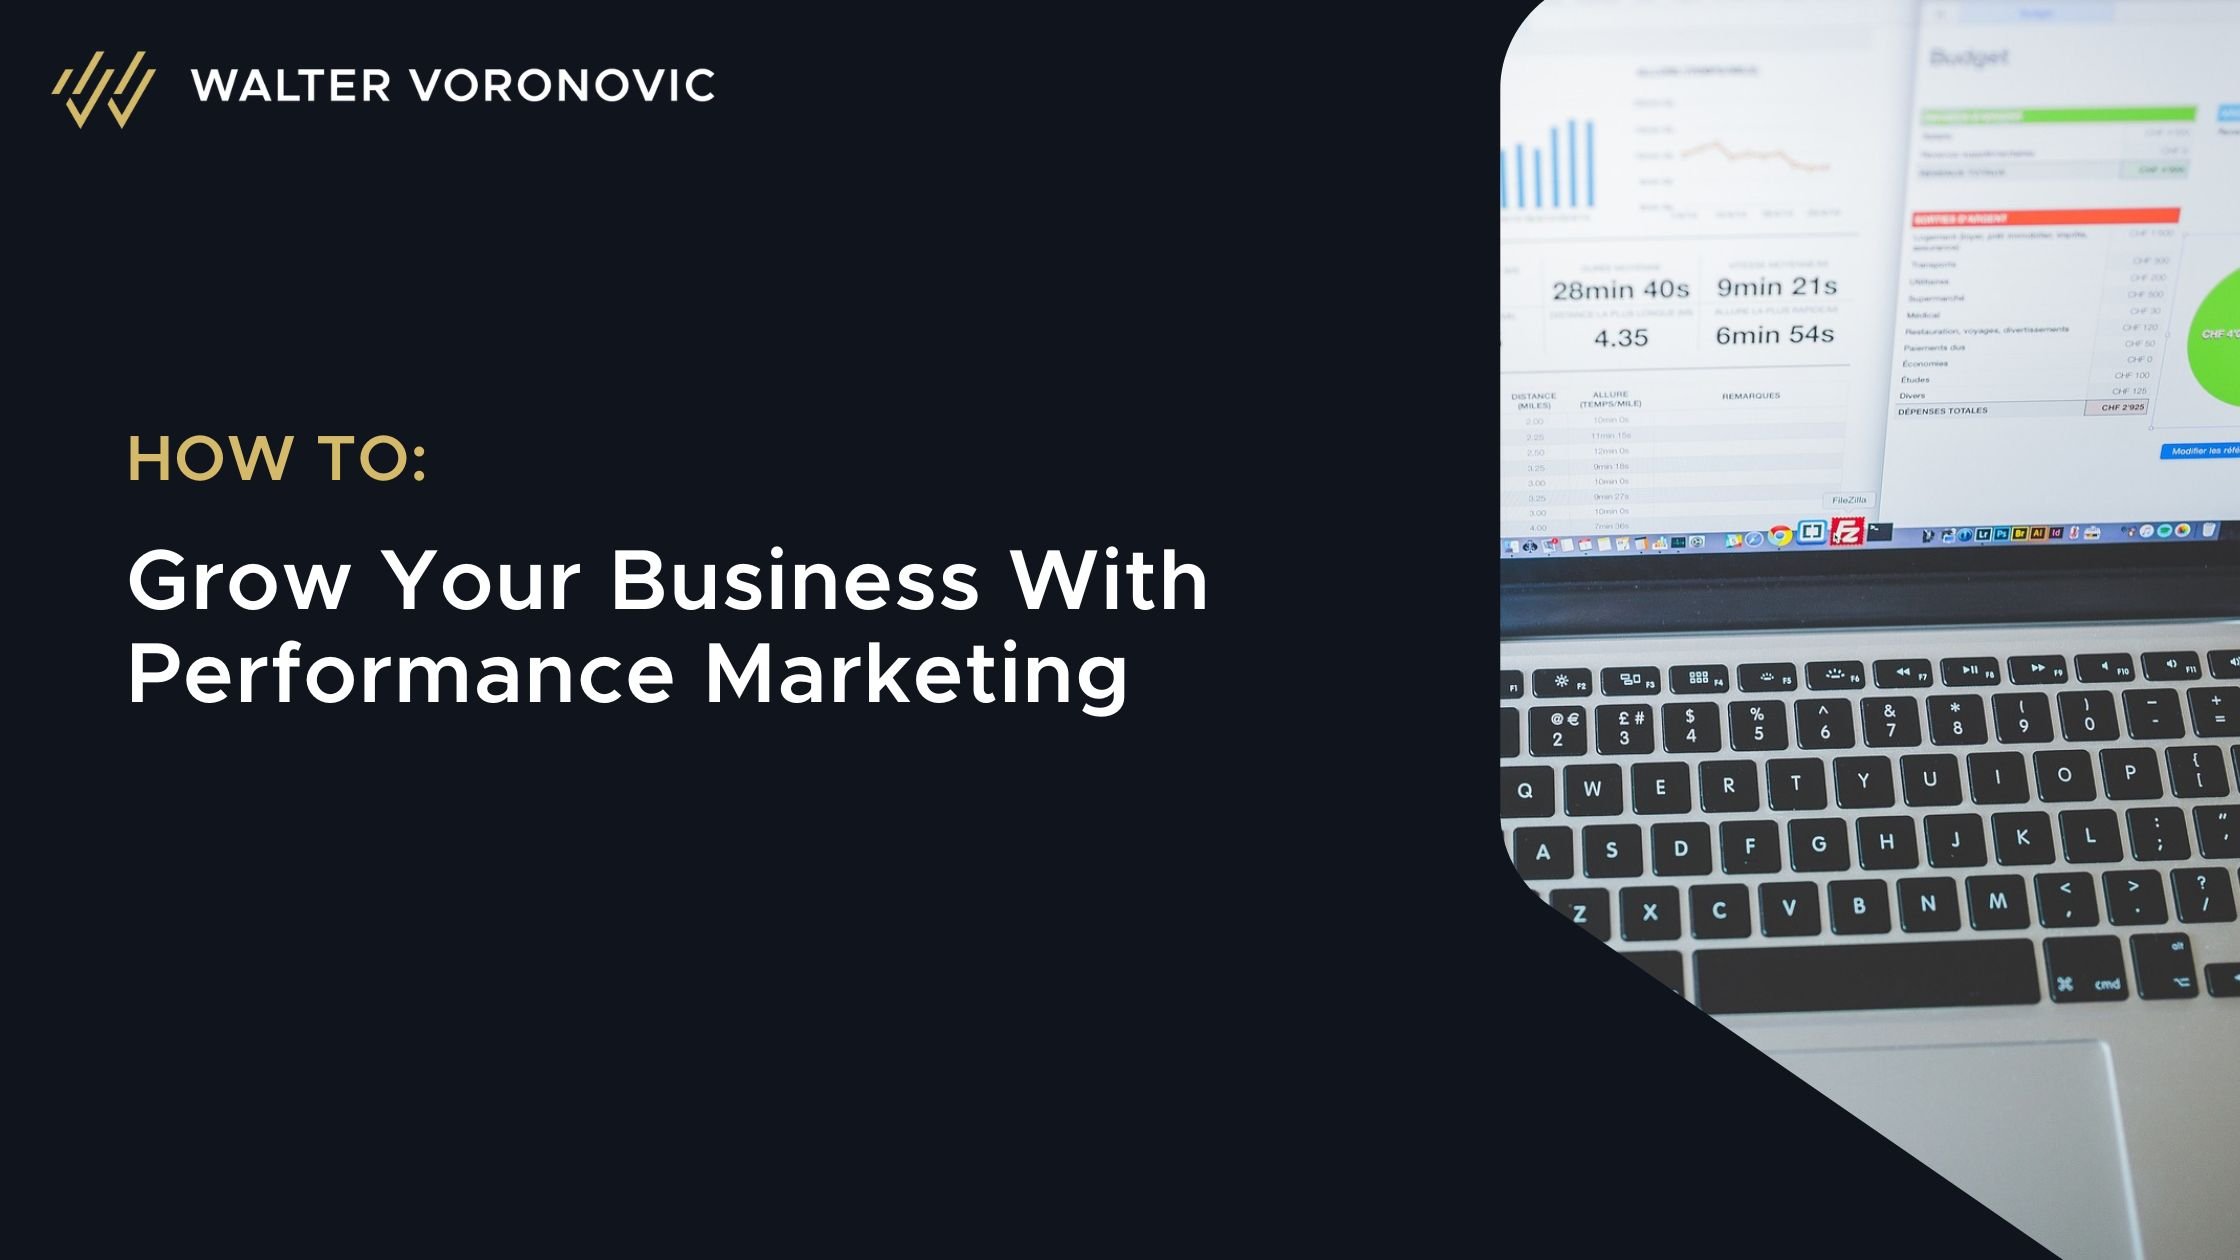 How to grow your business with performance marketing